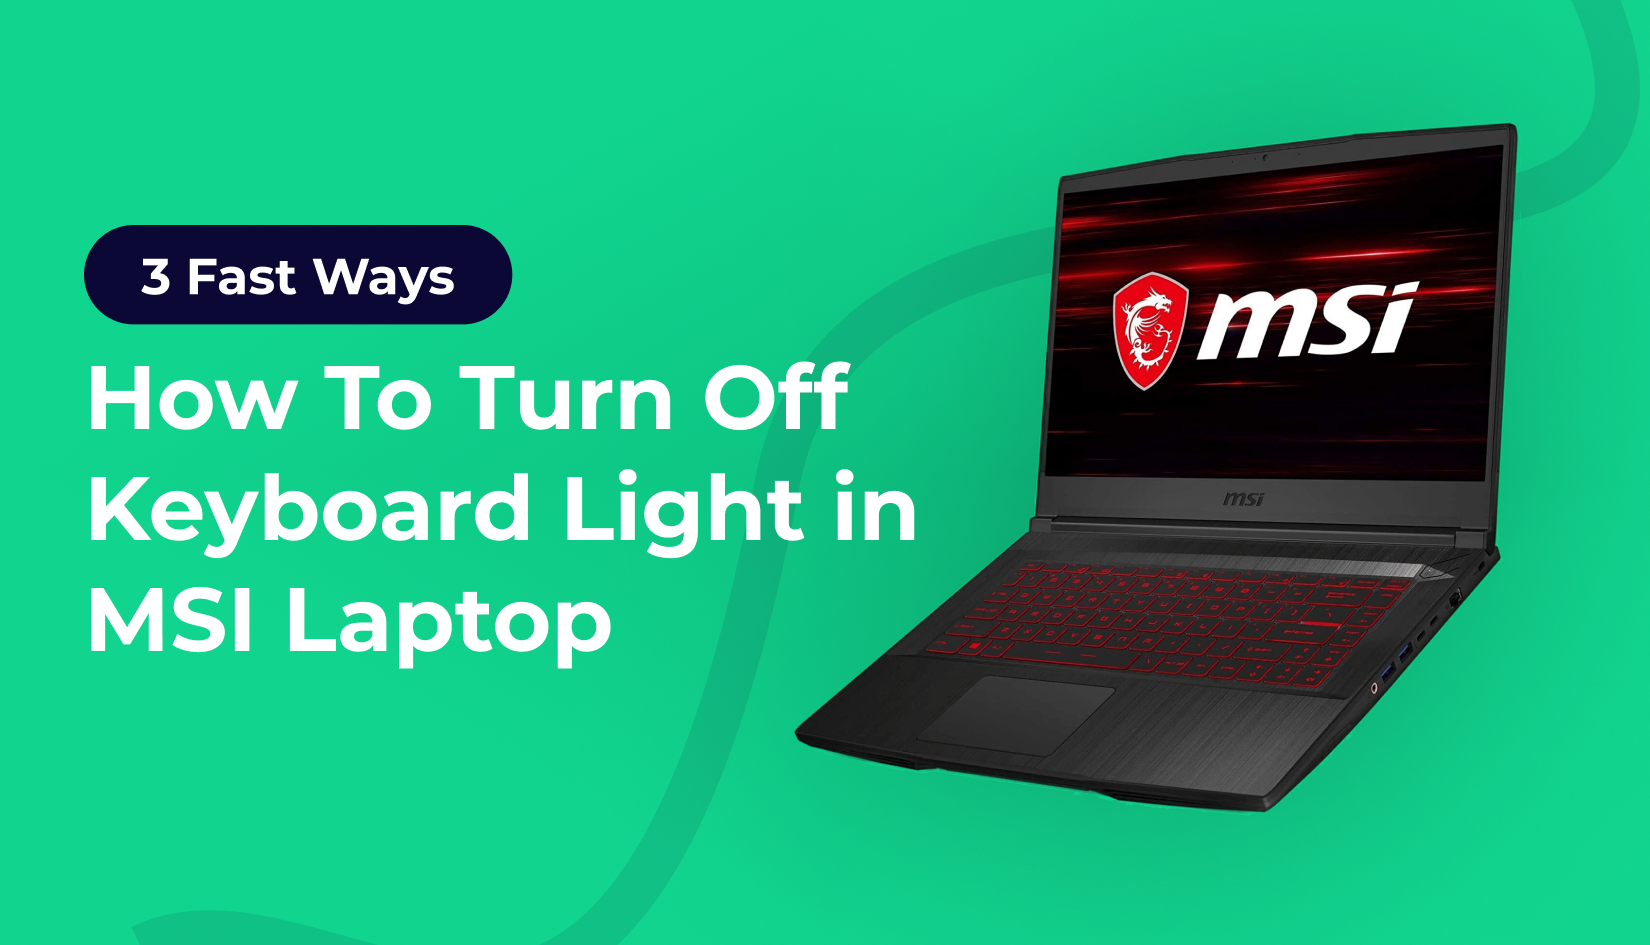 How To Turn Off Keyboard Light in MSI Laptop? 3 Quick Methods